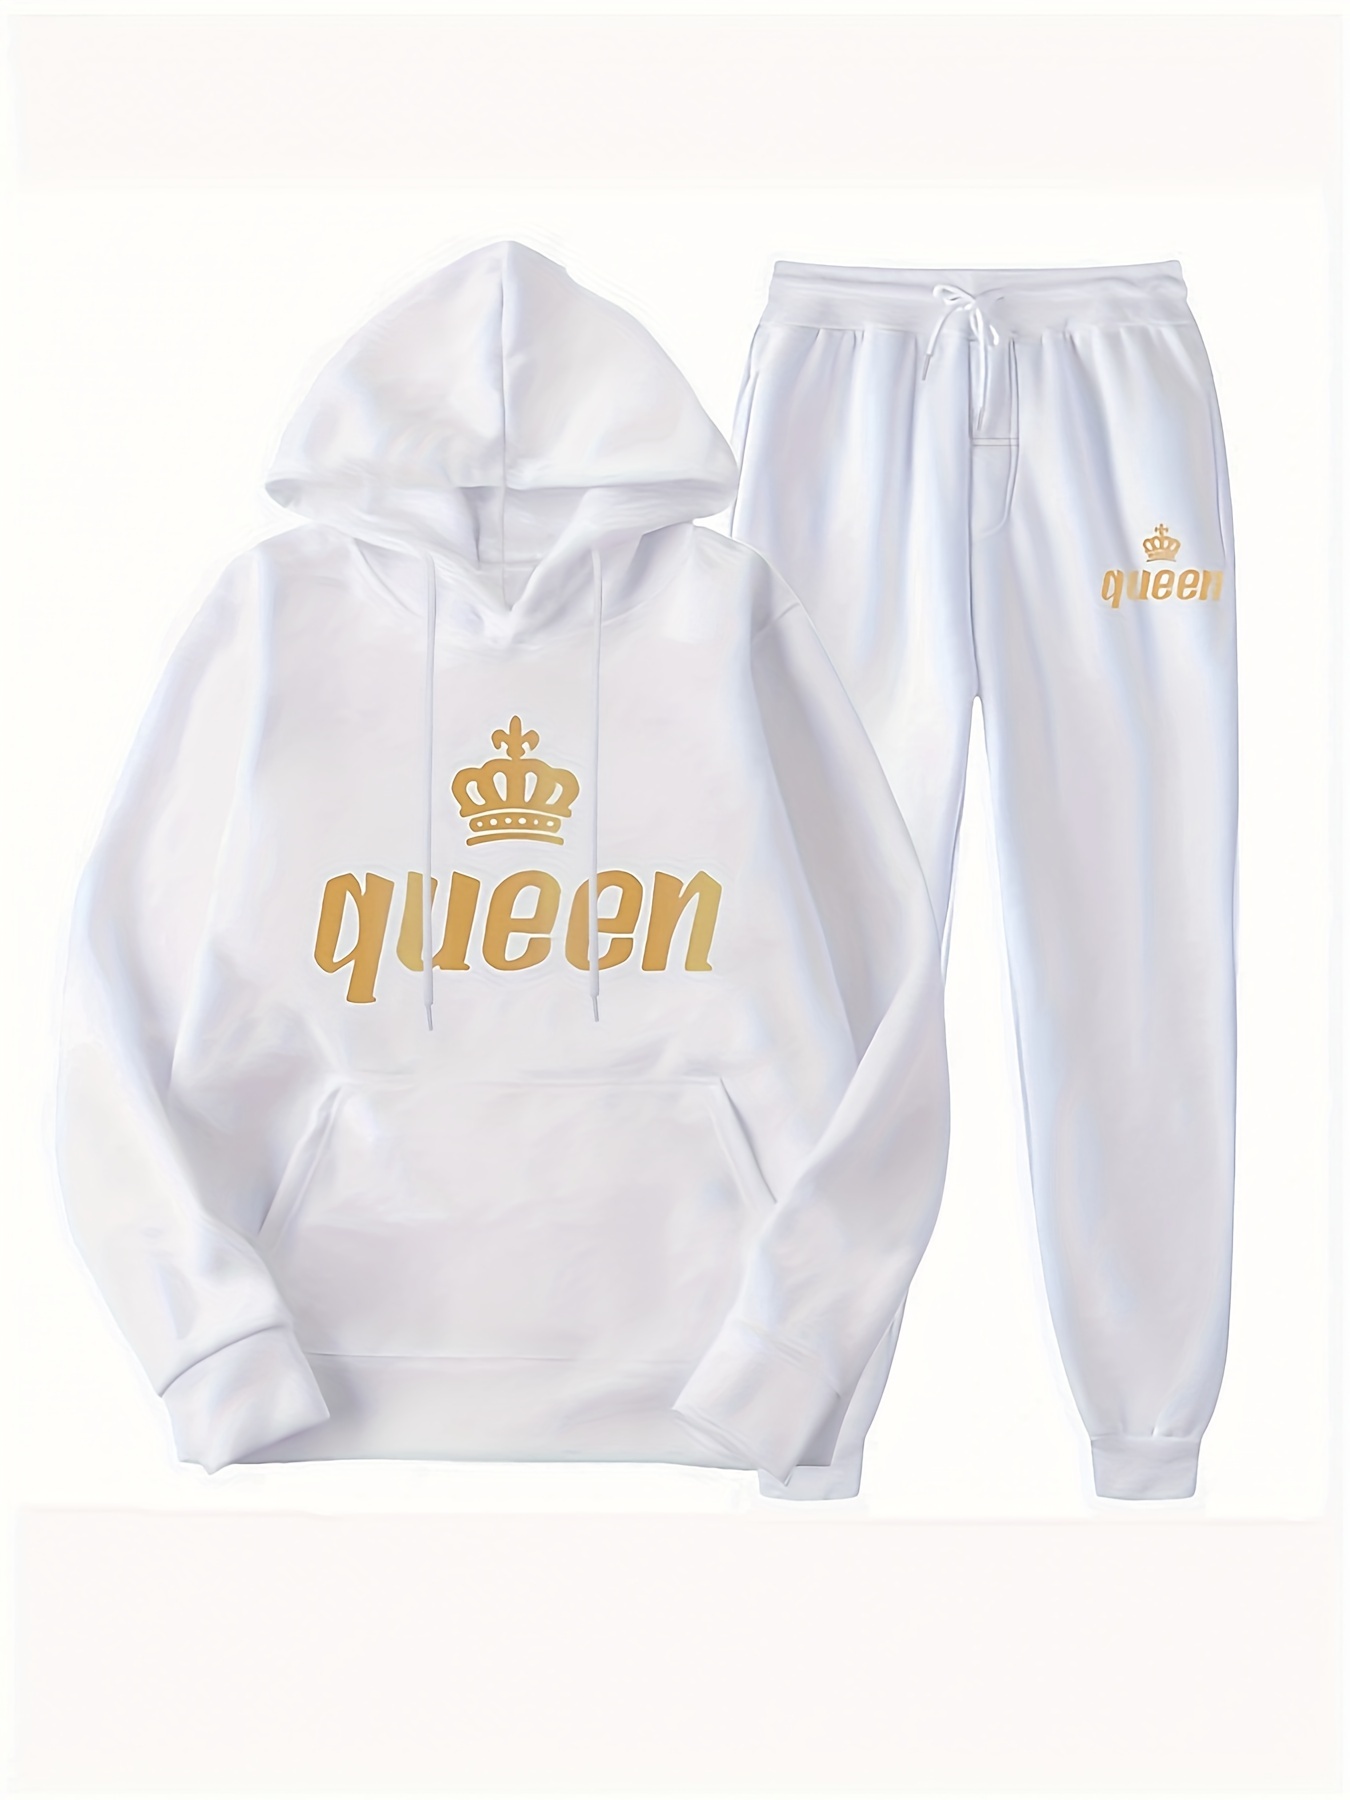 Plus Size Sporty Outfits Set, Women's Plus Letter Graphic Long Sleeve  Drawstring Hoodie With Pockets & Joggers Outfits 2 Piece Set